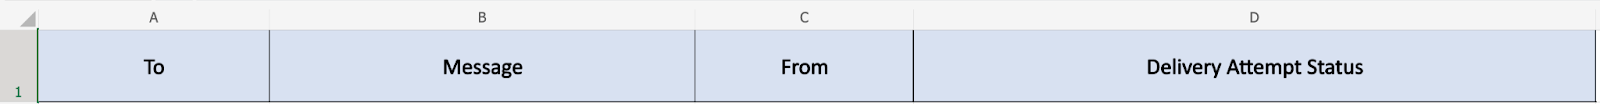 4 column headers in an Excel Online spreadsheet: To, Message, From, and Delivery Attempt Status